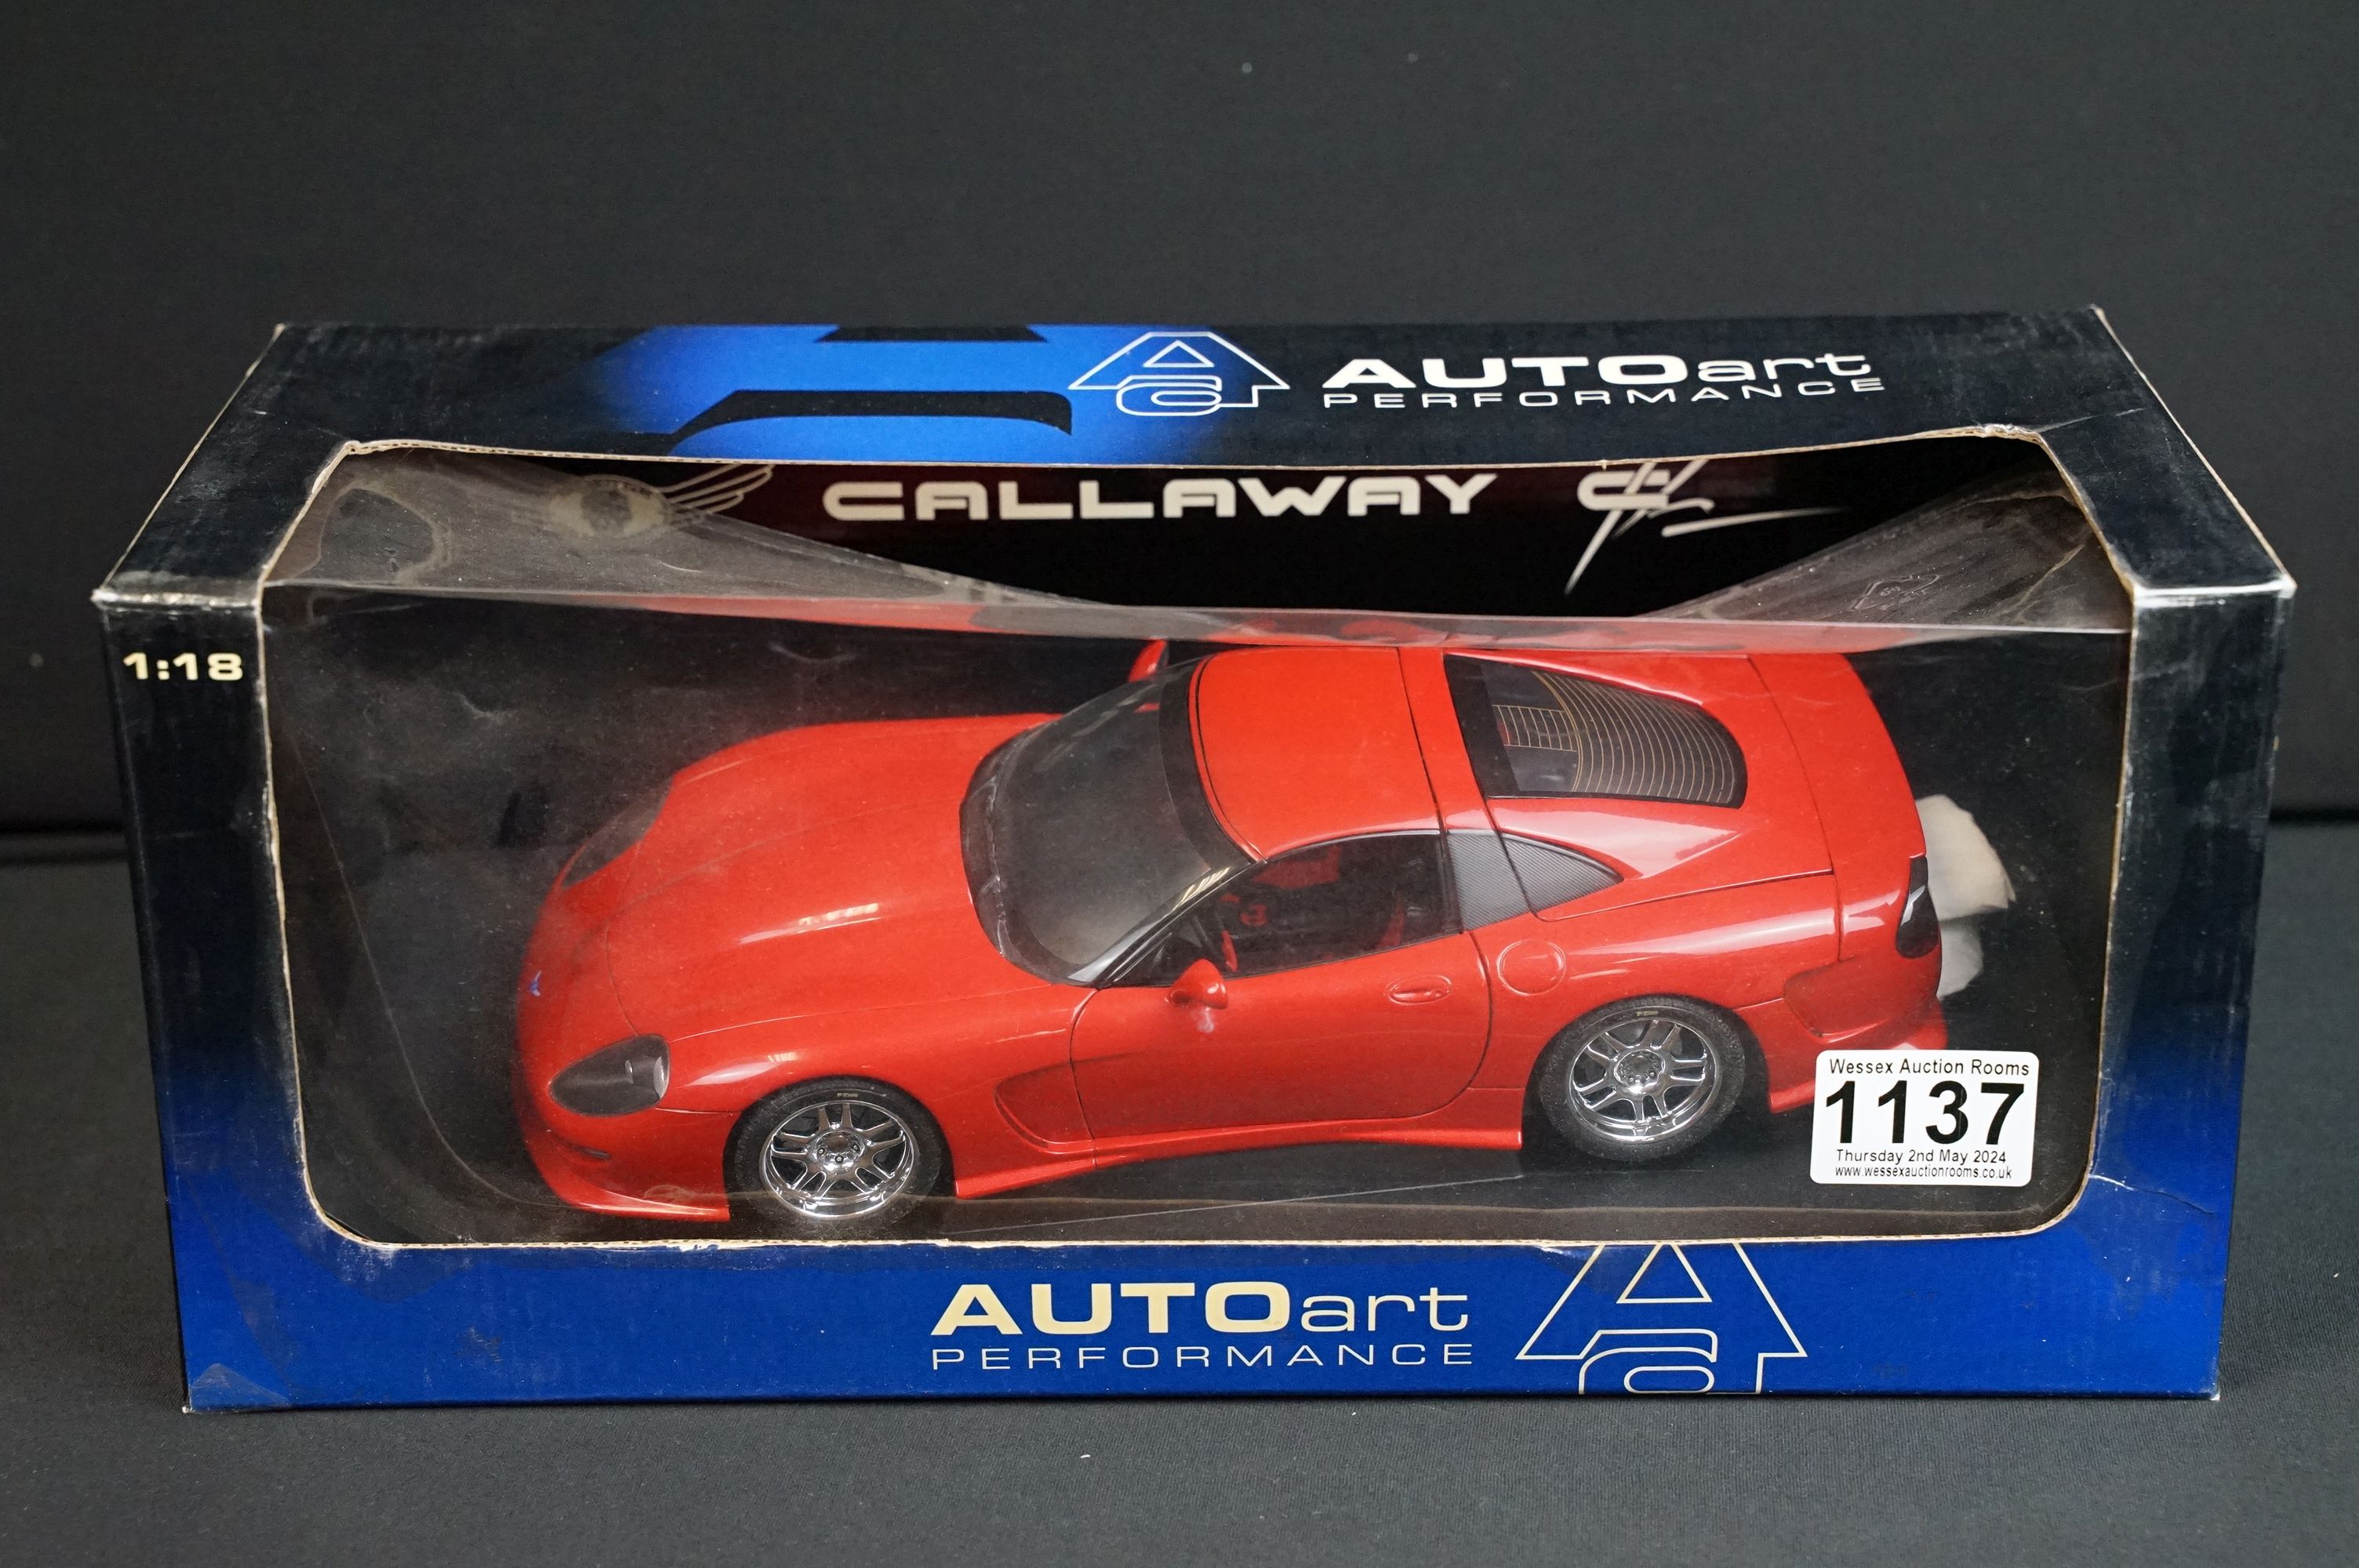 Five boxed 1/18 scale diecast models to include 4 x UT Models featuring Chevrolet Corvette, - Image 4 of 11